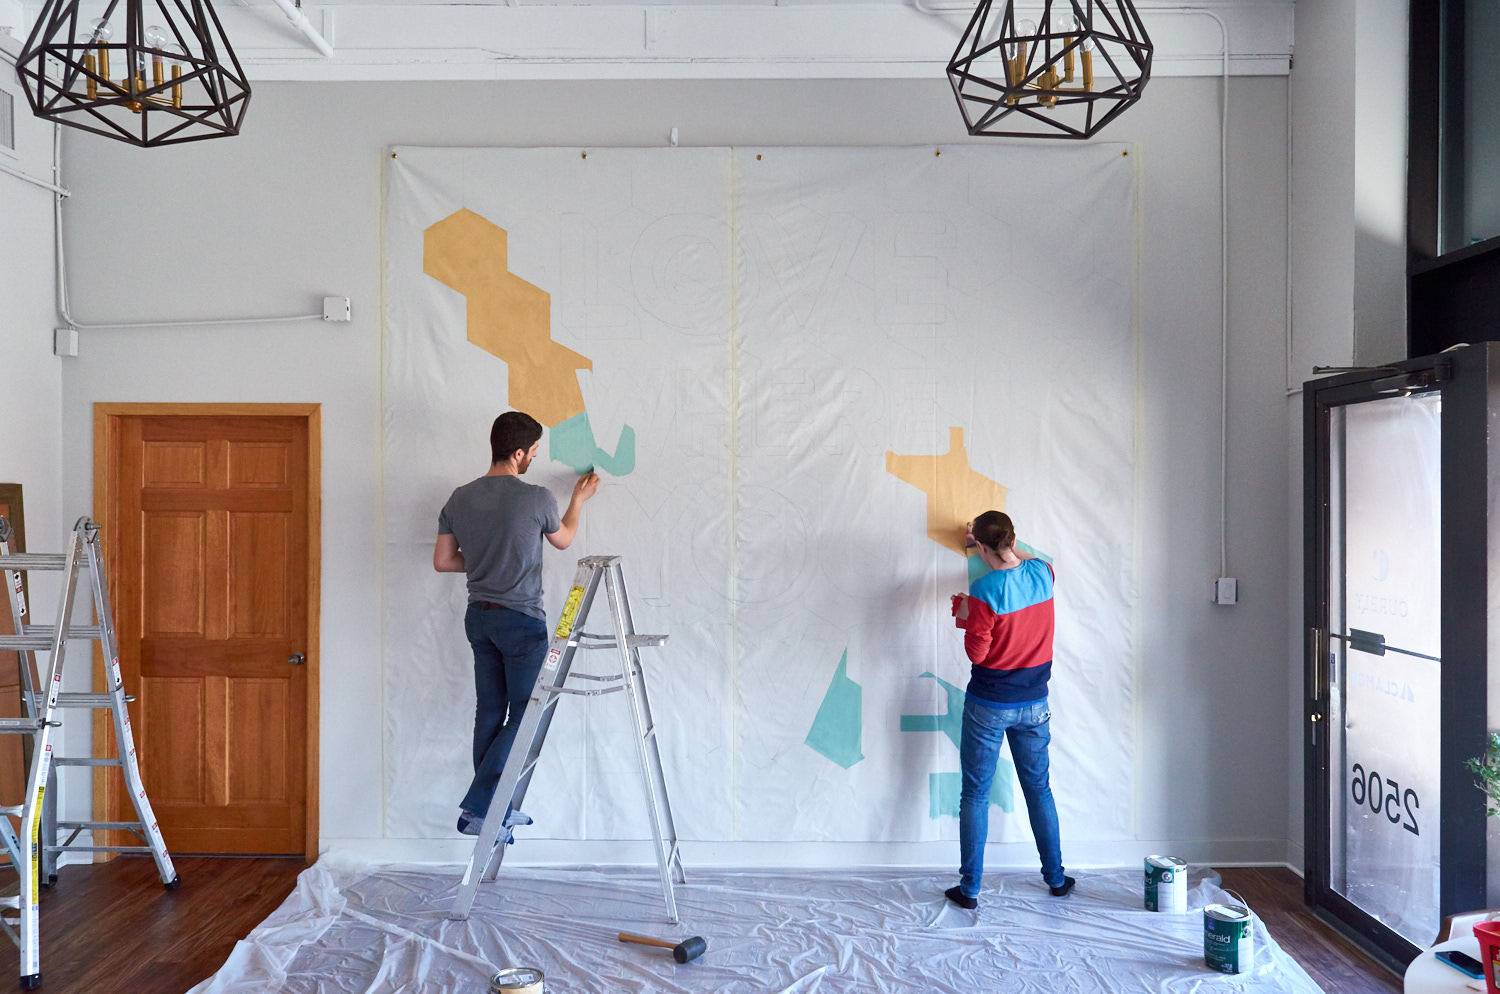 Two people are painting designs to the wall inside the house.